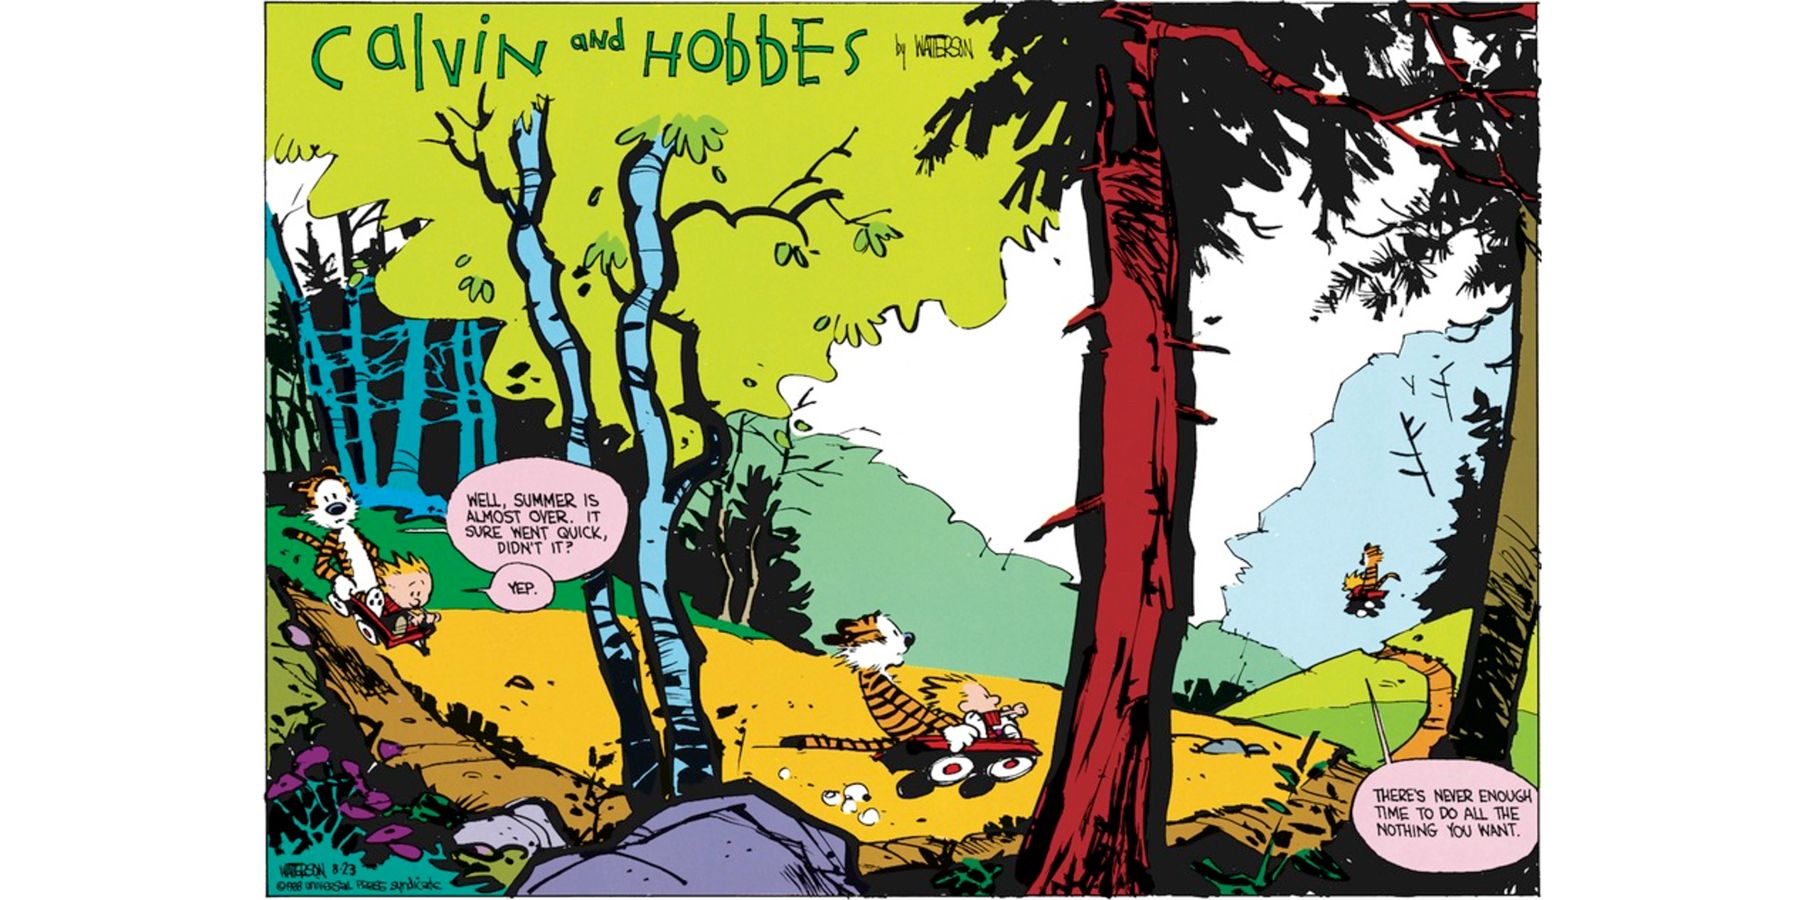 Calvin and Hobbes riding in a wagon and lamenting the end of summer